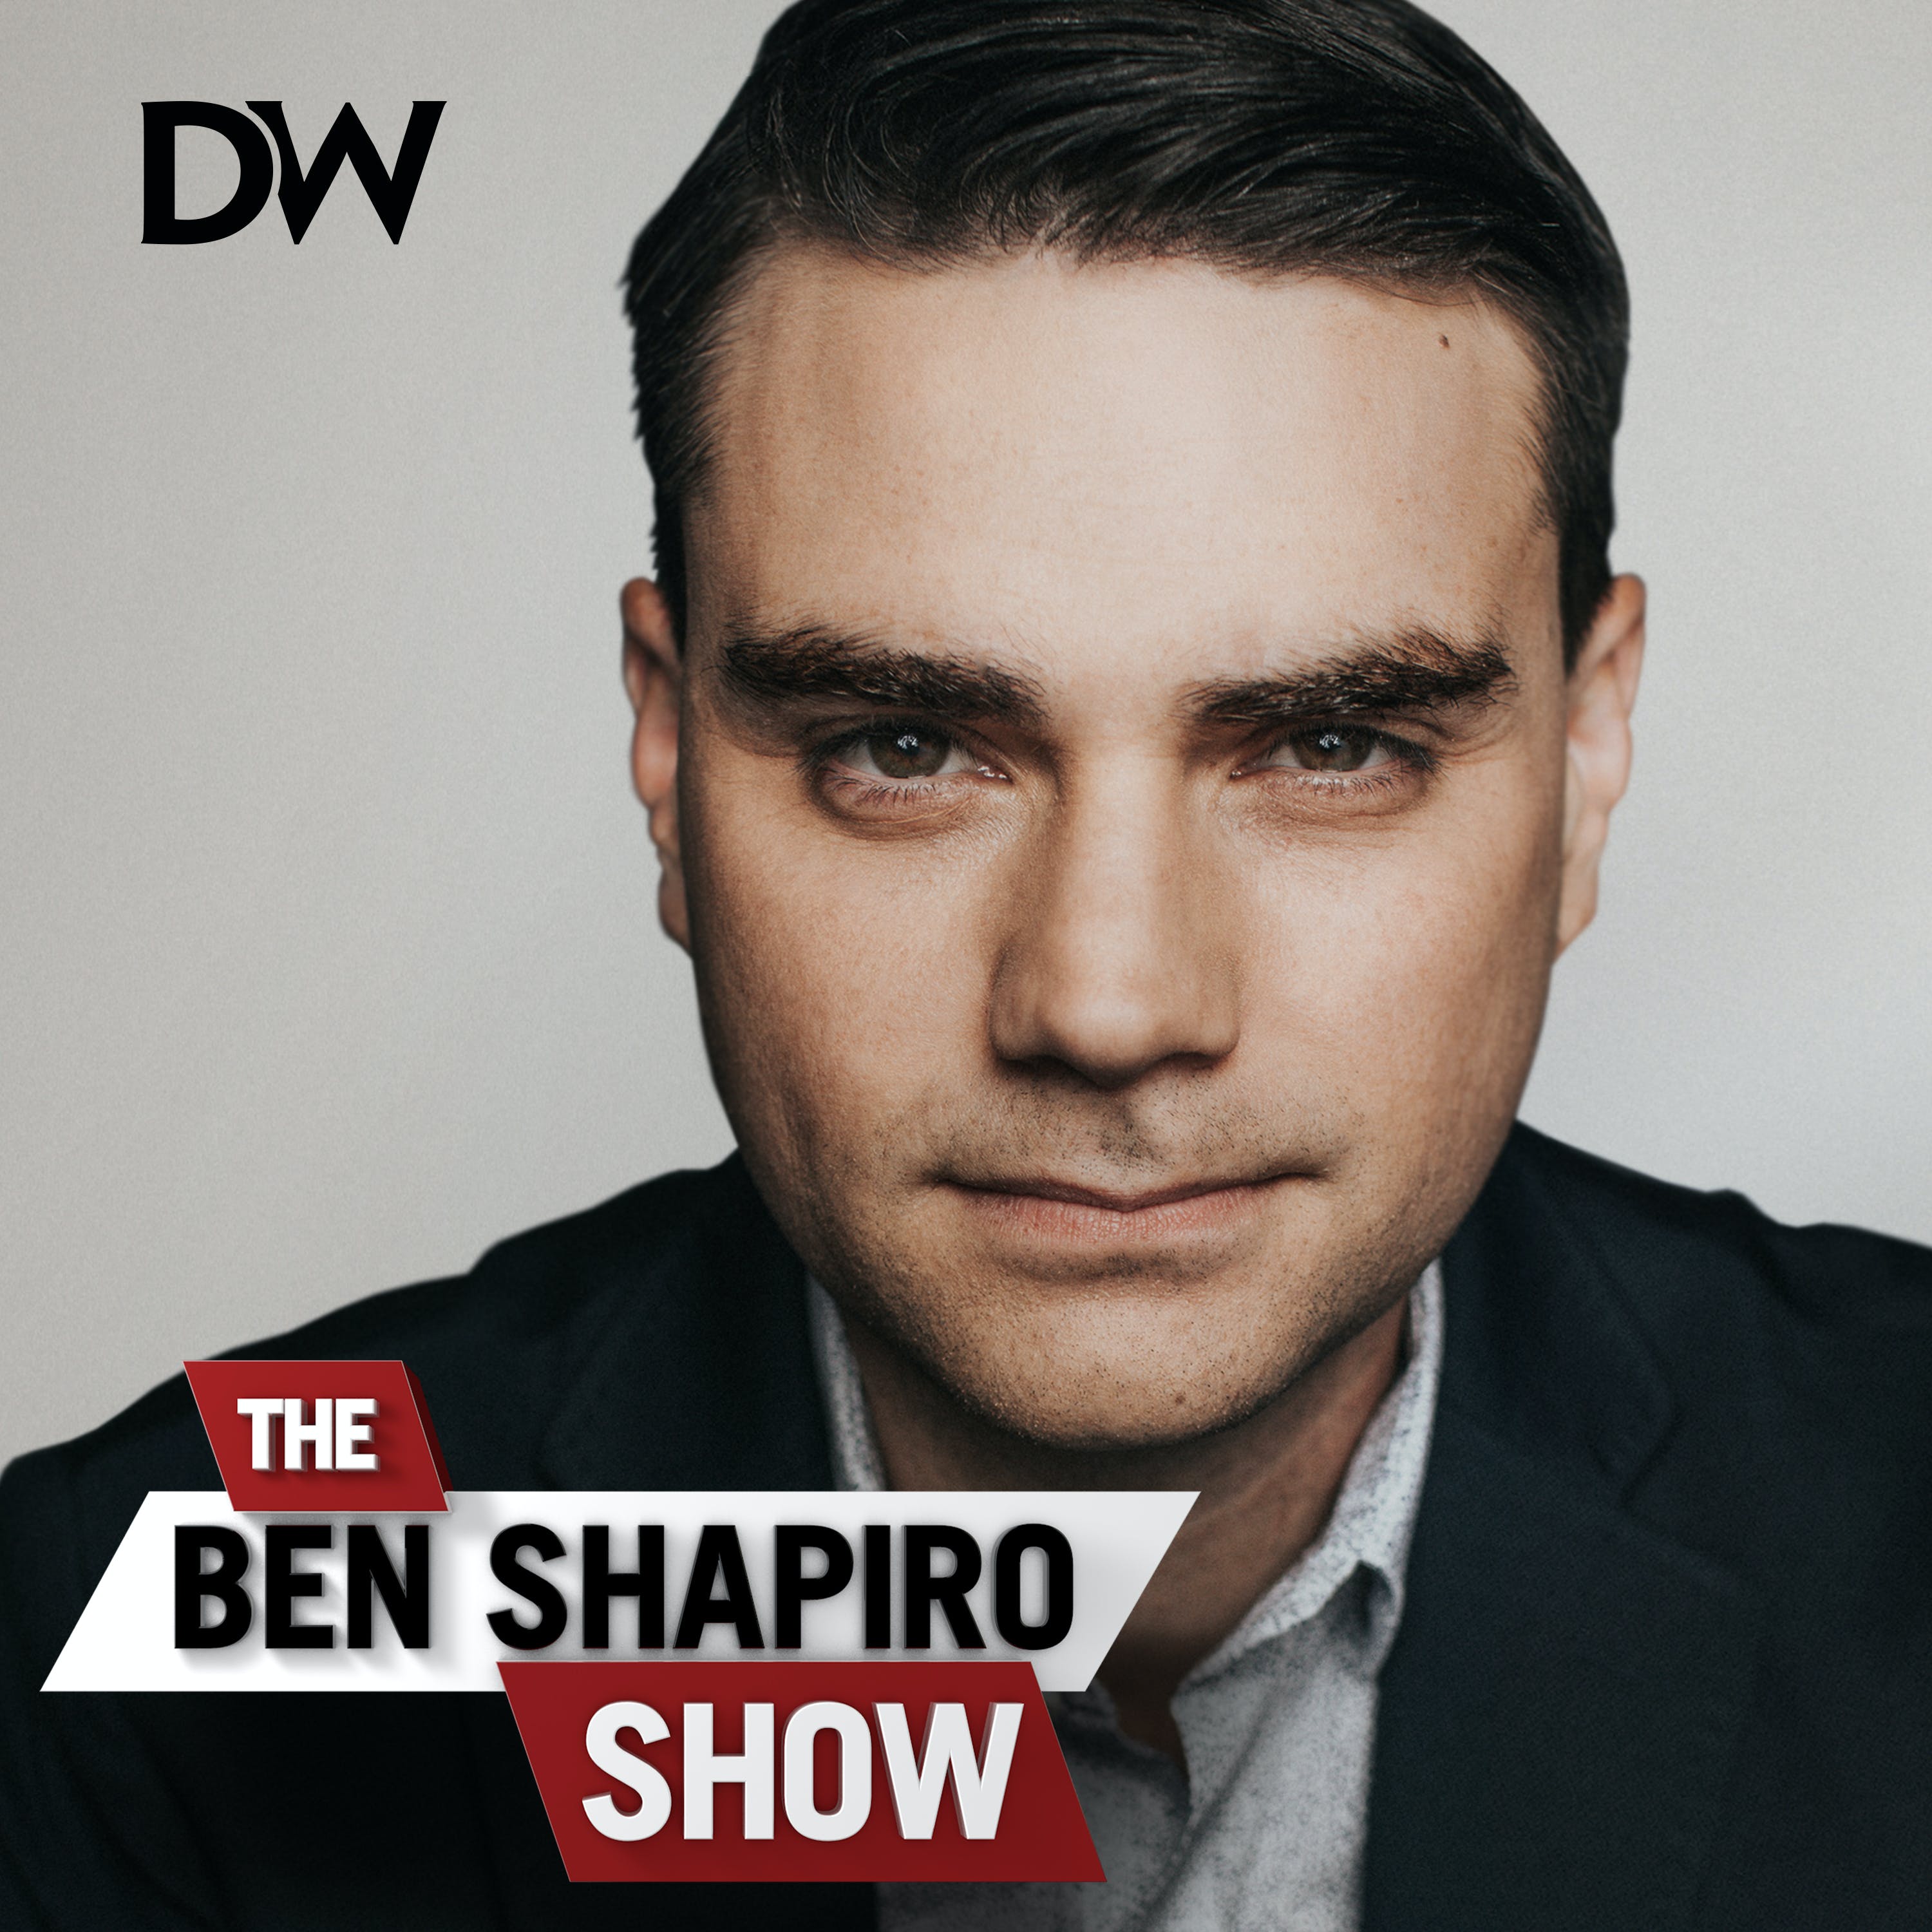 Ben Shapiro Reacts to Kanye West Tweeting His Support for Balenciaga